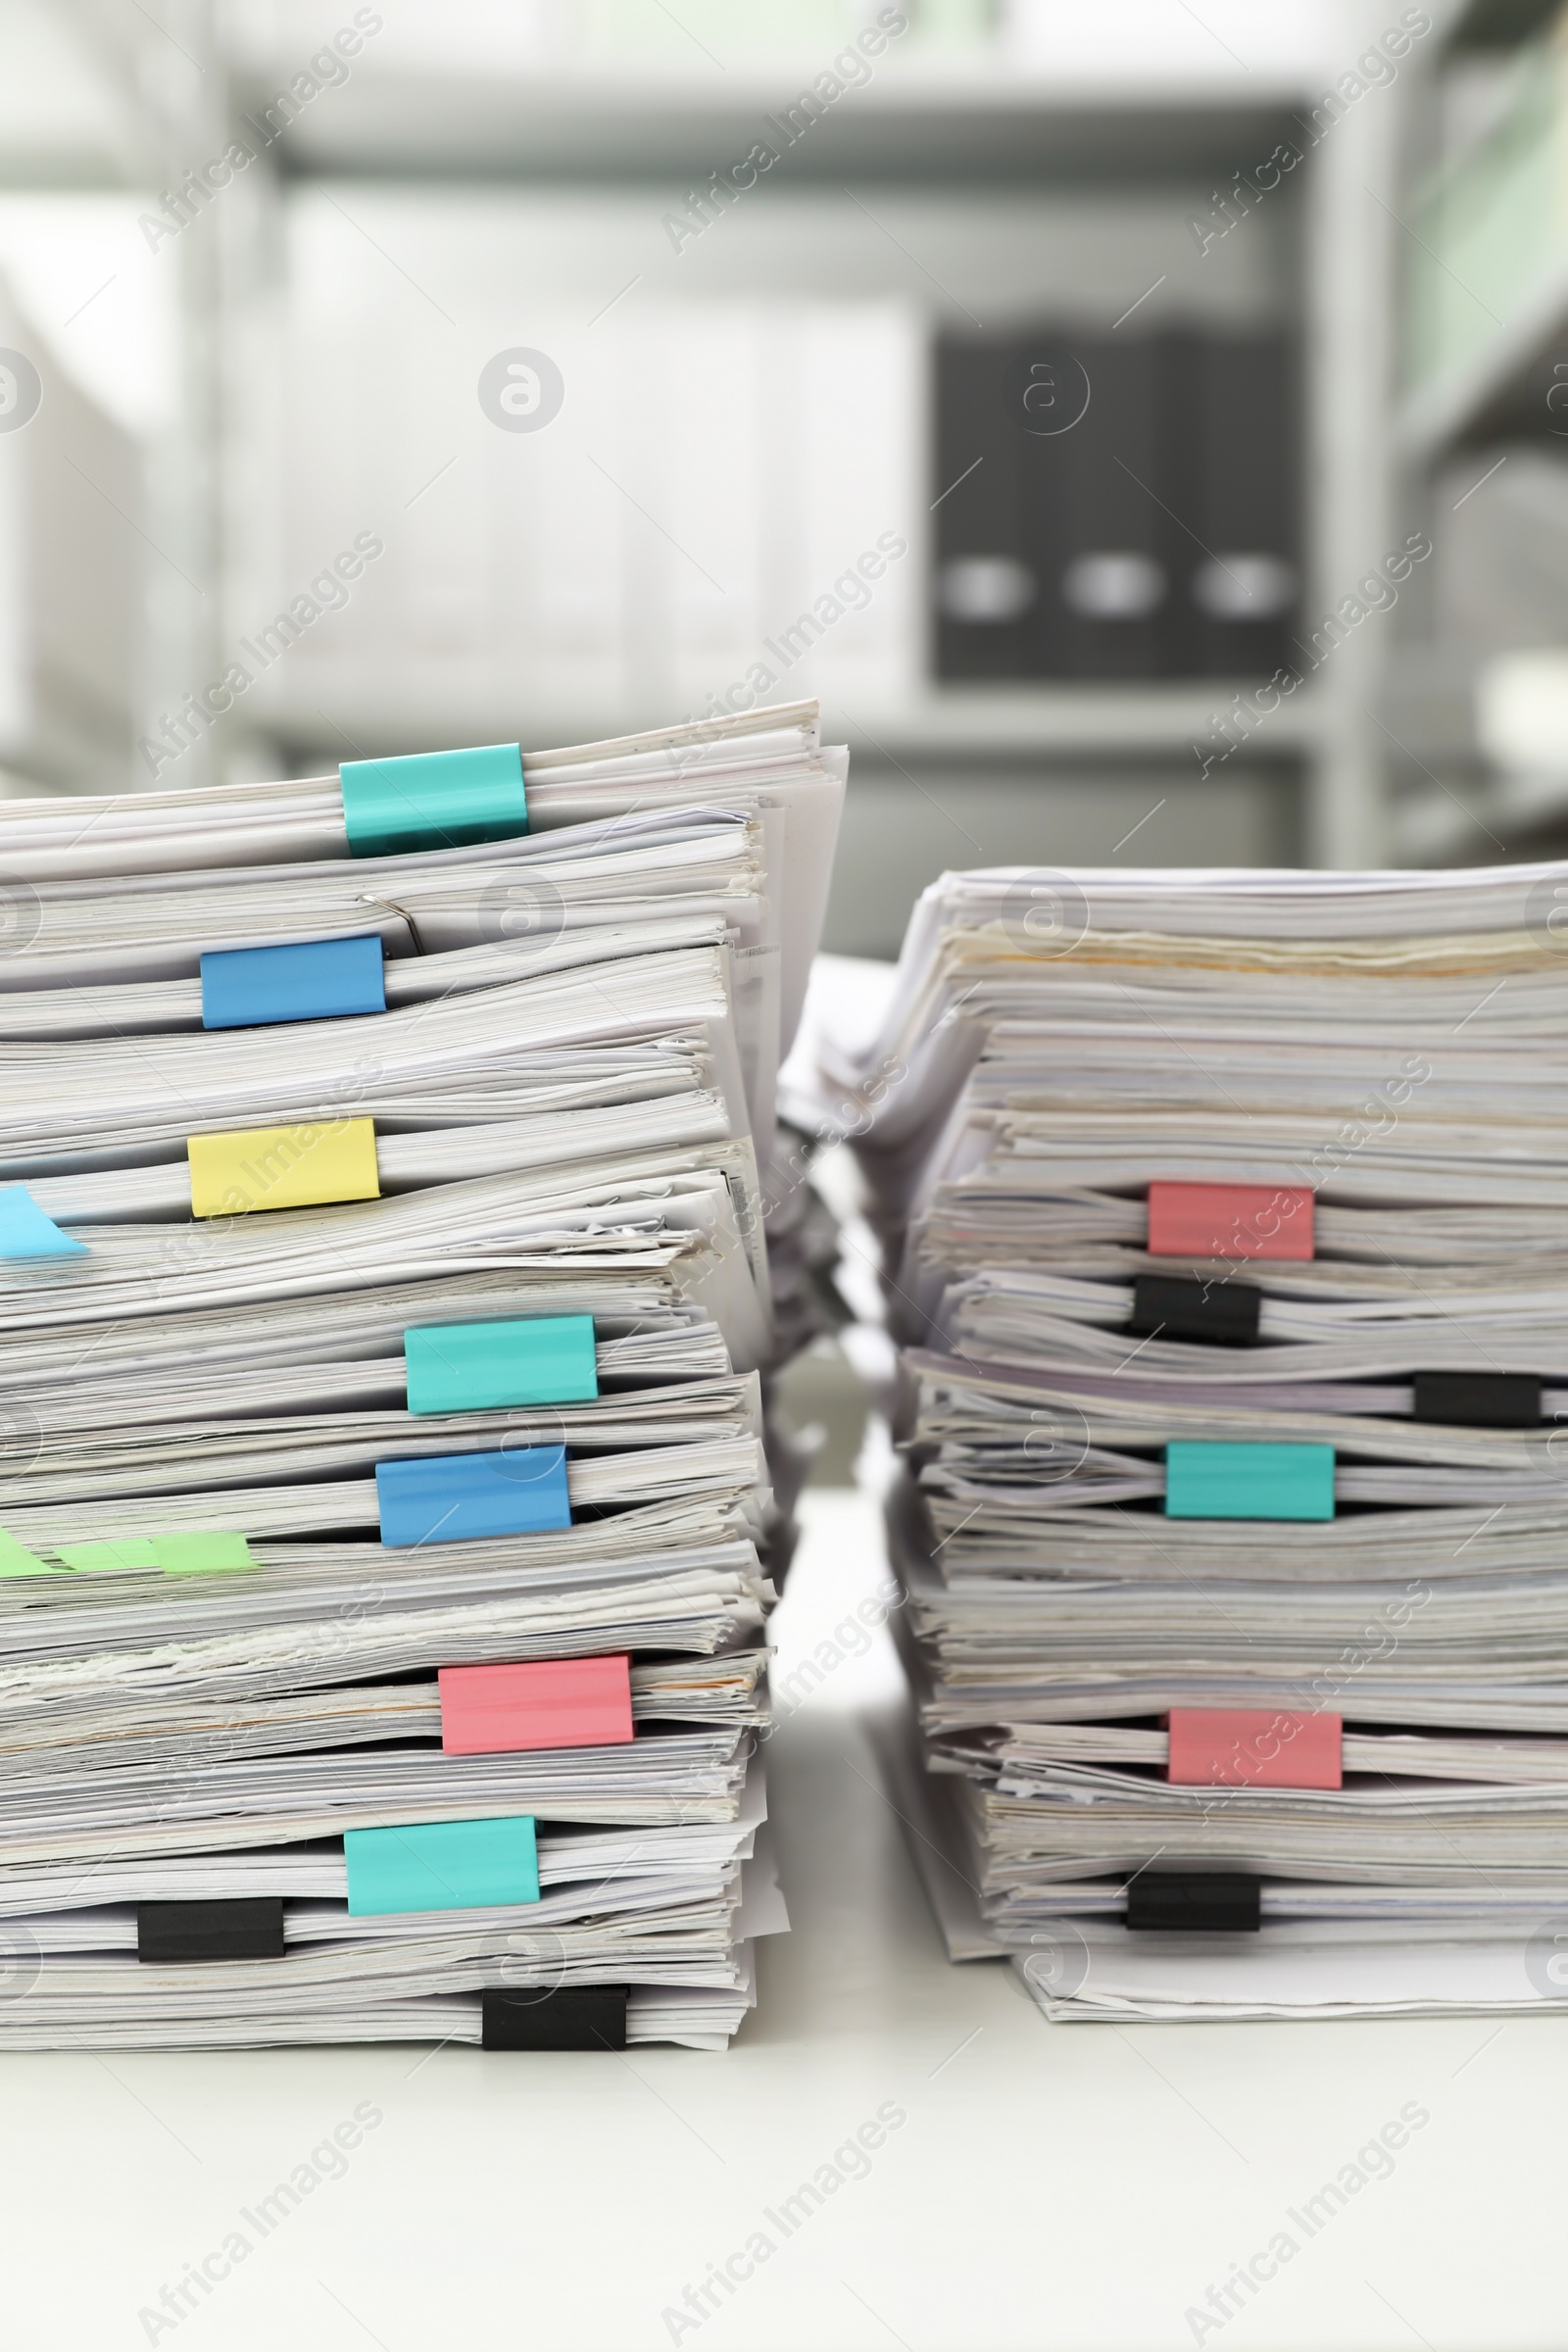 Photo of Stacks of documents with paper clips on office desk